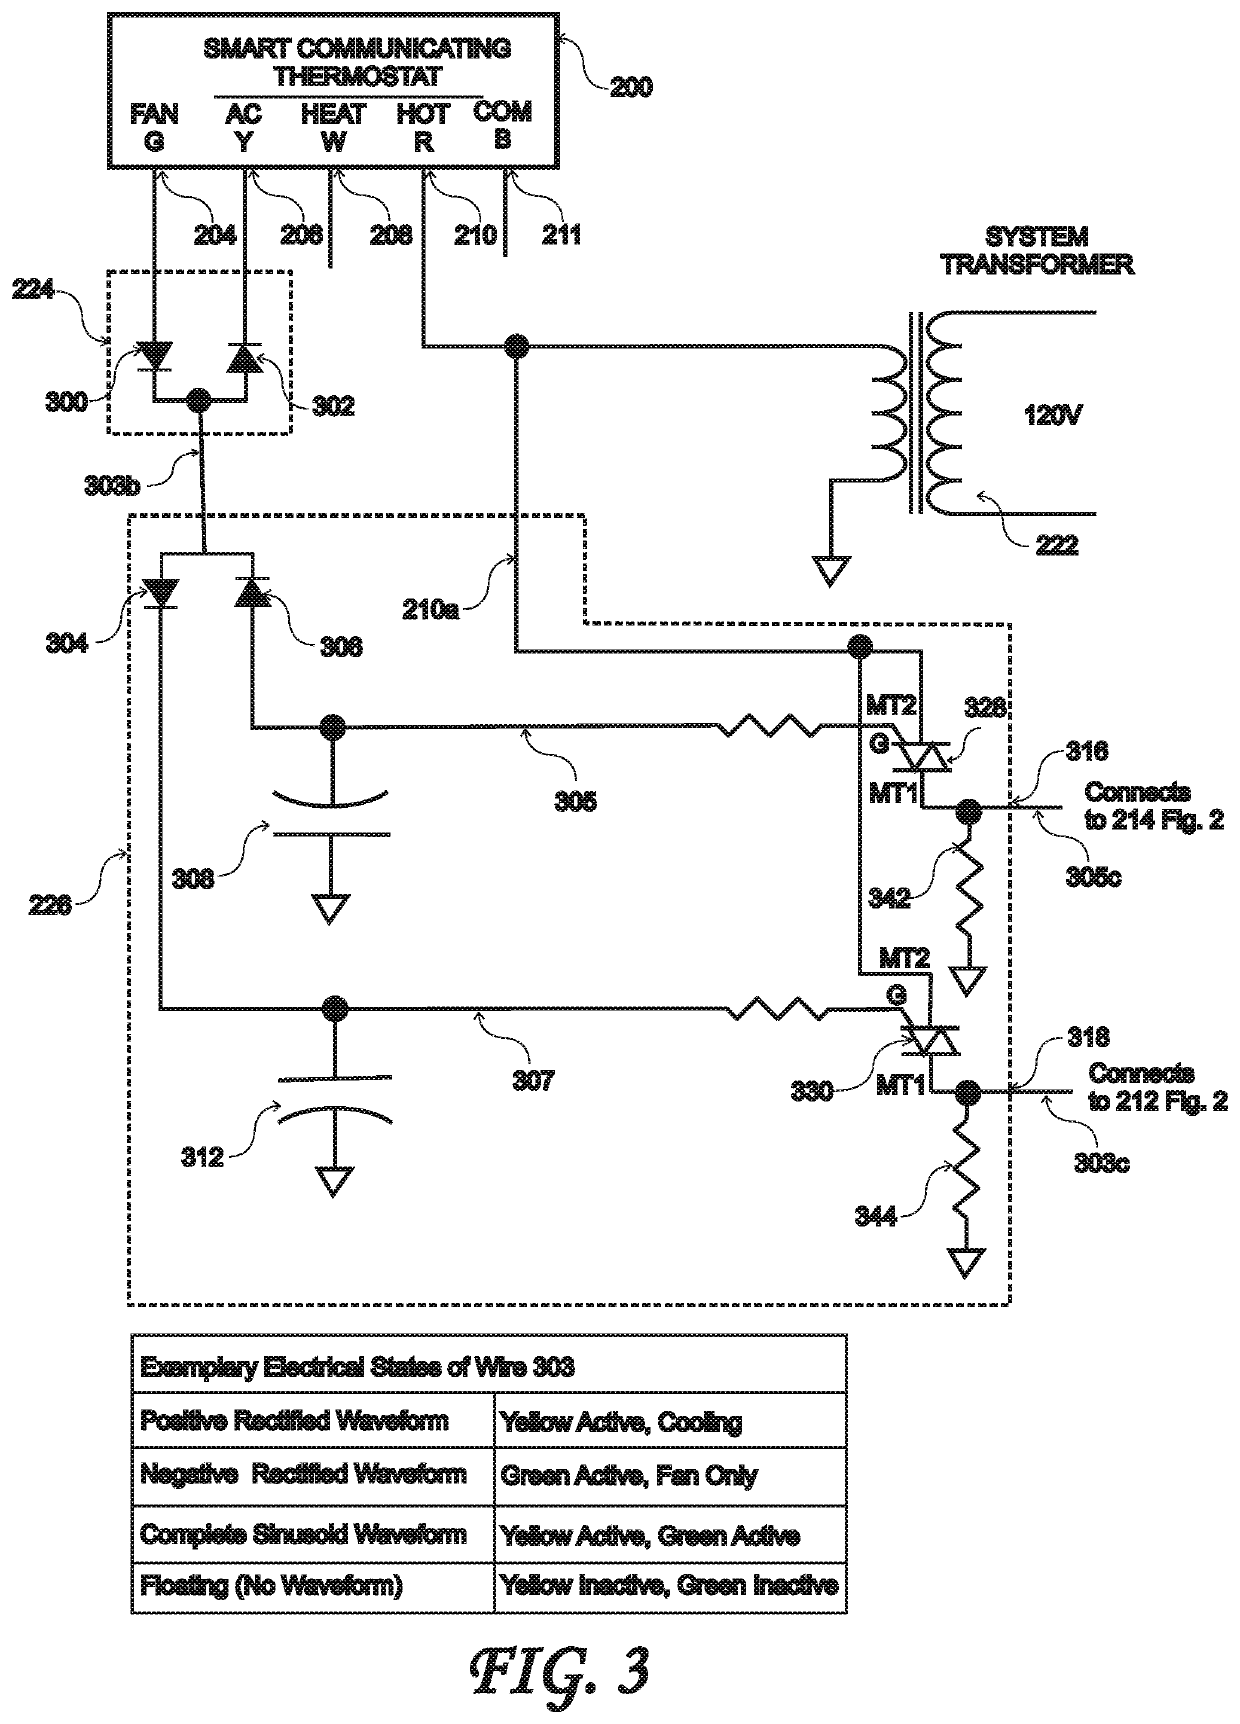 Solid-state Electronic Apparatus to Provide Reliable Electric Power for Smart Communicating Thermostats